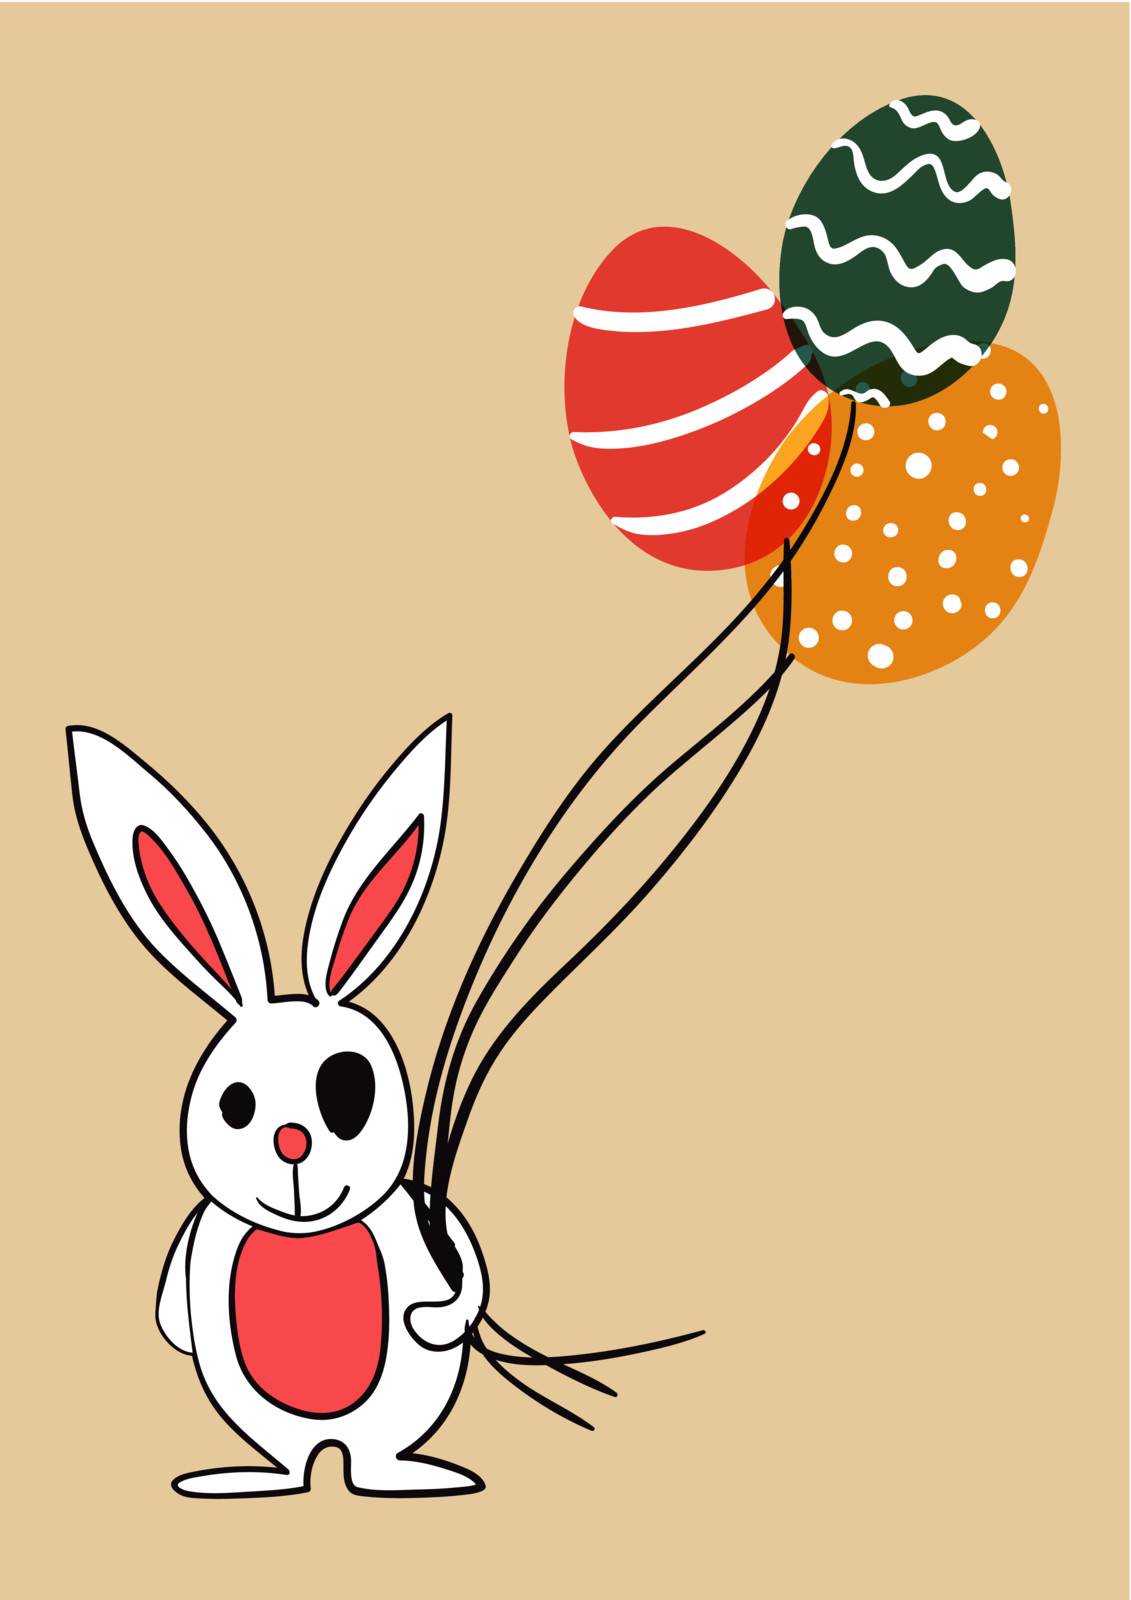 Easter bunny with eggs as balloons. EPS10 file version. This illustration contains transparencies and is layered for easy manipulation and custom coloring